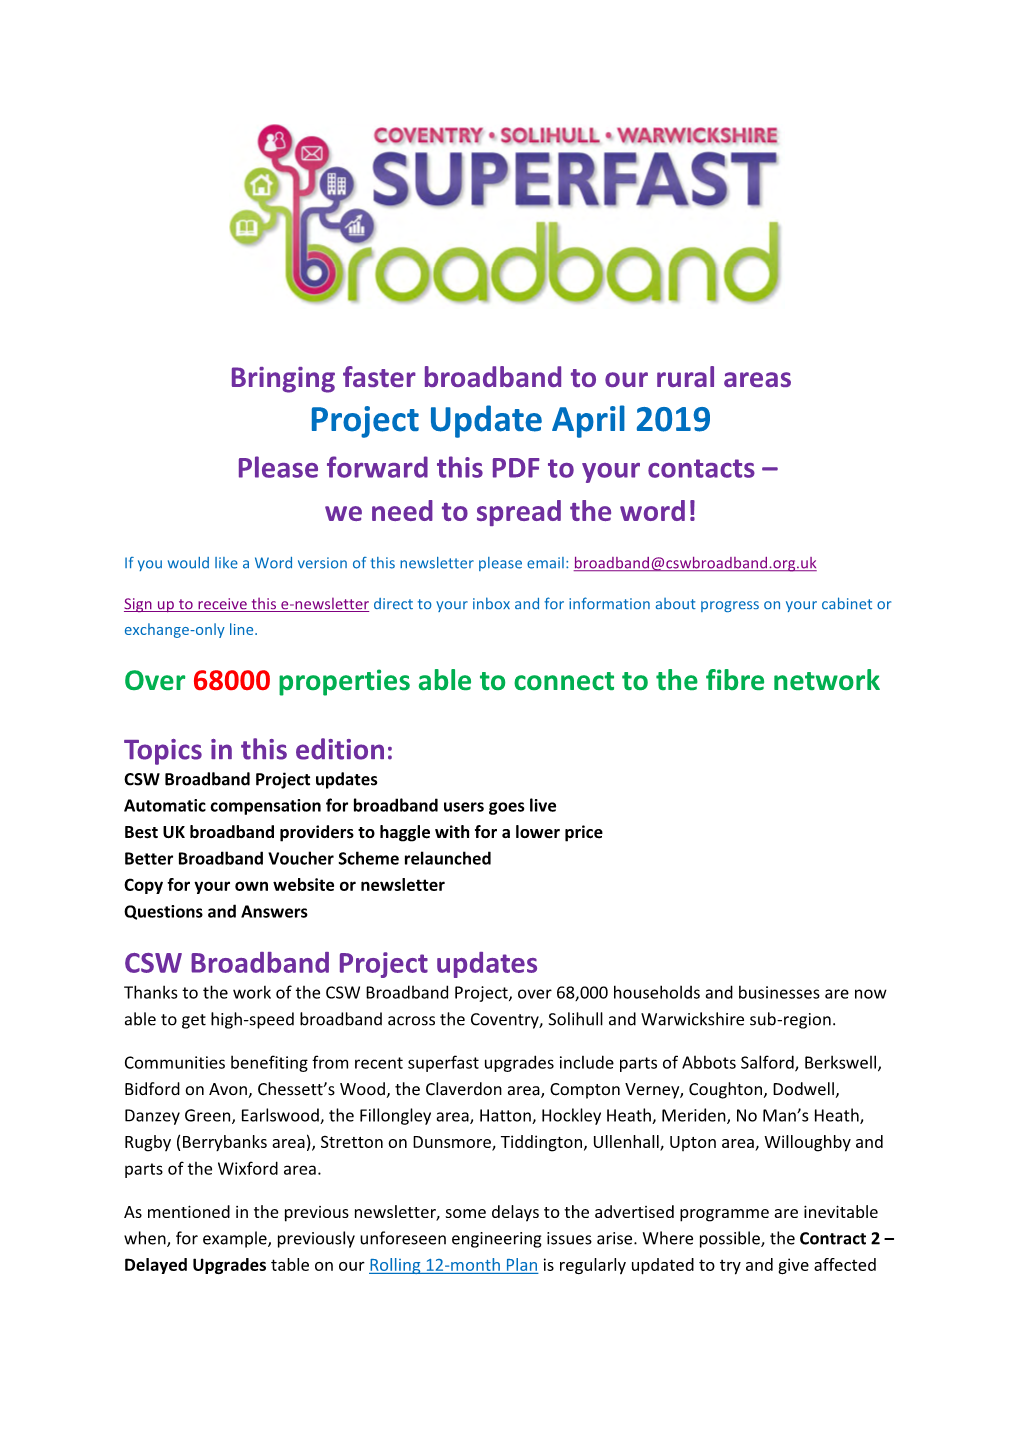 Project Update April 2019 Please Forward This PDF to Your Contacts – We Need to Spread the Word!